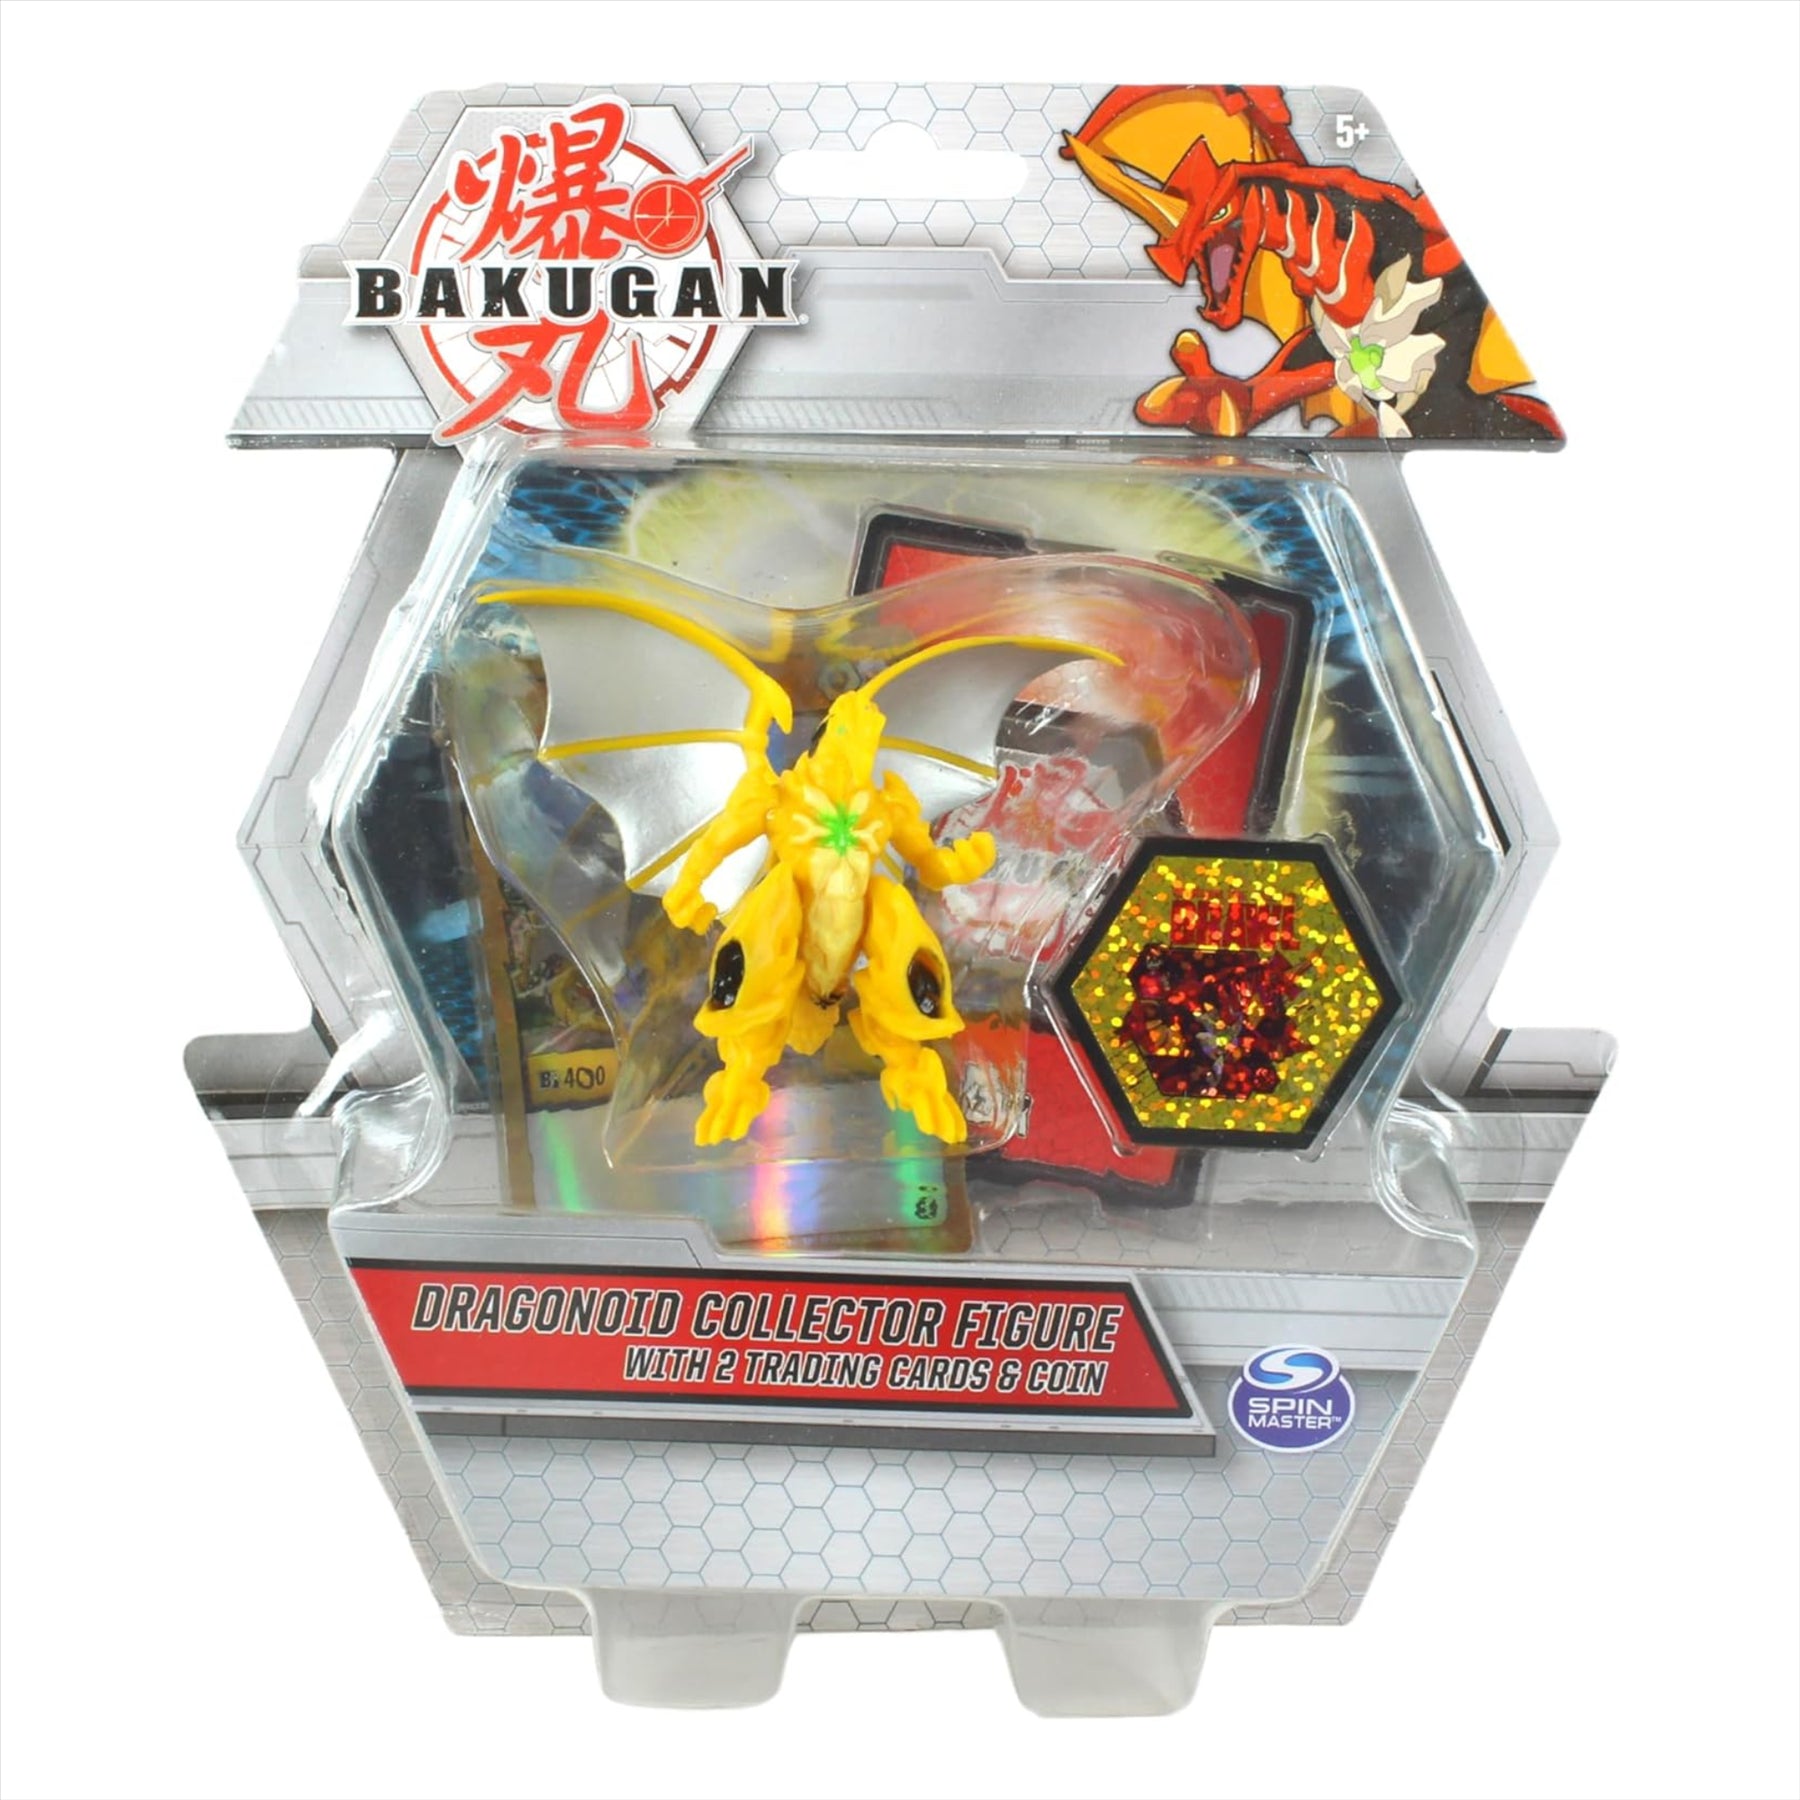 BAKUGAN - Dragonoid Yellow Collector Figure With 2 Trading Cards & Collectors Coin - Toptoys2u